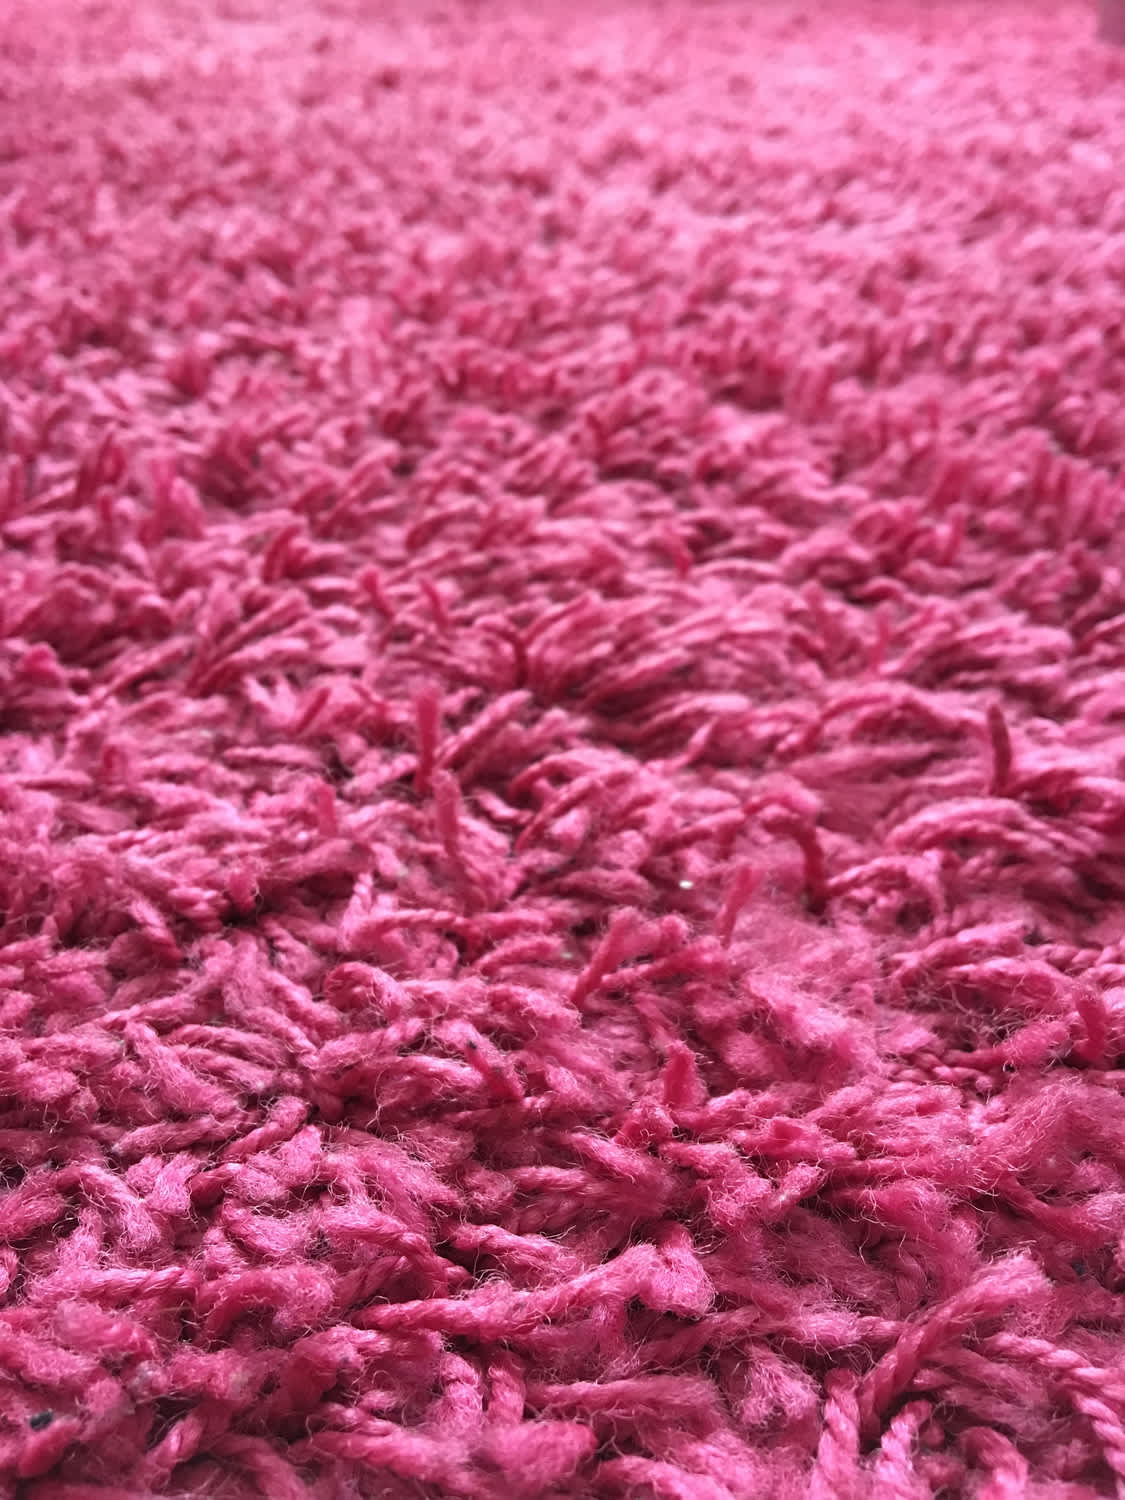 Photo of the pink rug laying on the floor. The rug has a woolly look with long fibres. Fuchsia/magenta colours. Some fluffy bits of the rug sticking out.